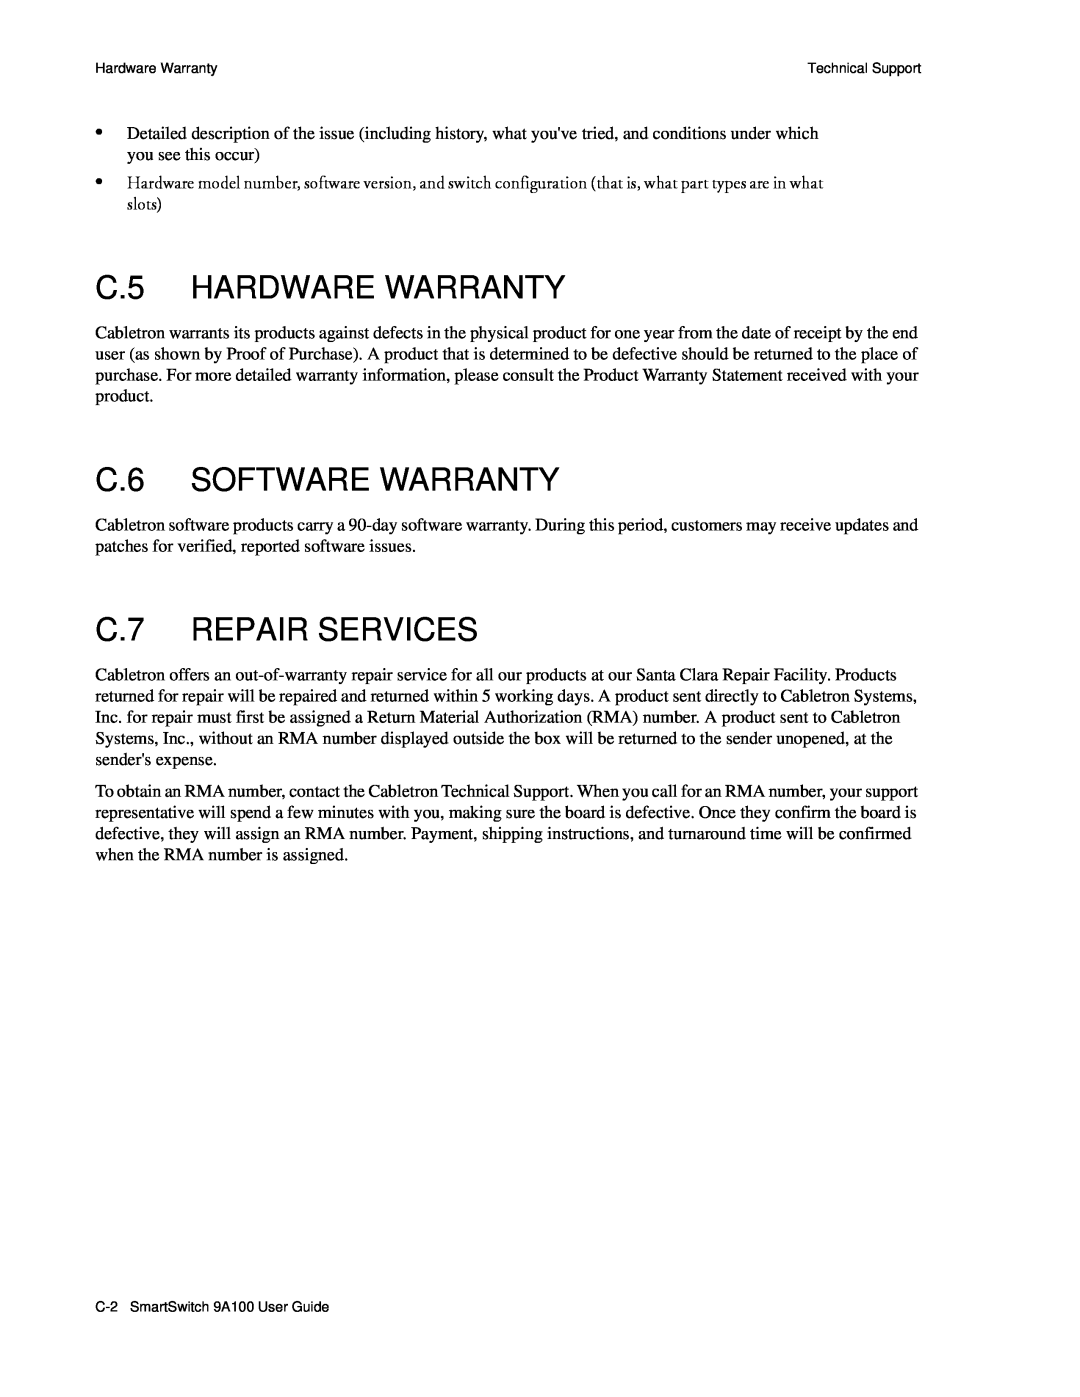 Cabletron Systems 9A100 manual C.5 HARDWARE WARRANTY, C.6 SOFTWARE WARRANTY, C.7 REPAIR SERVICES, Hardware Warranty 